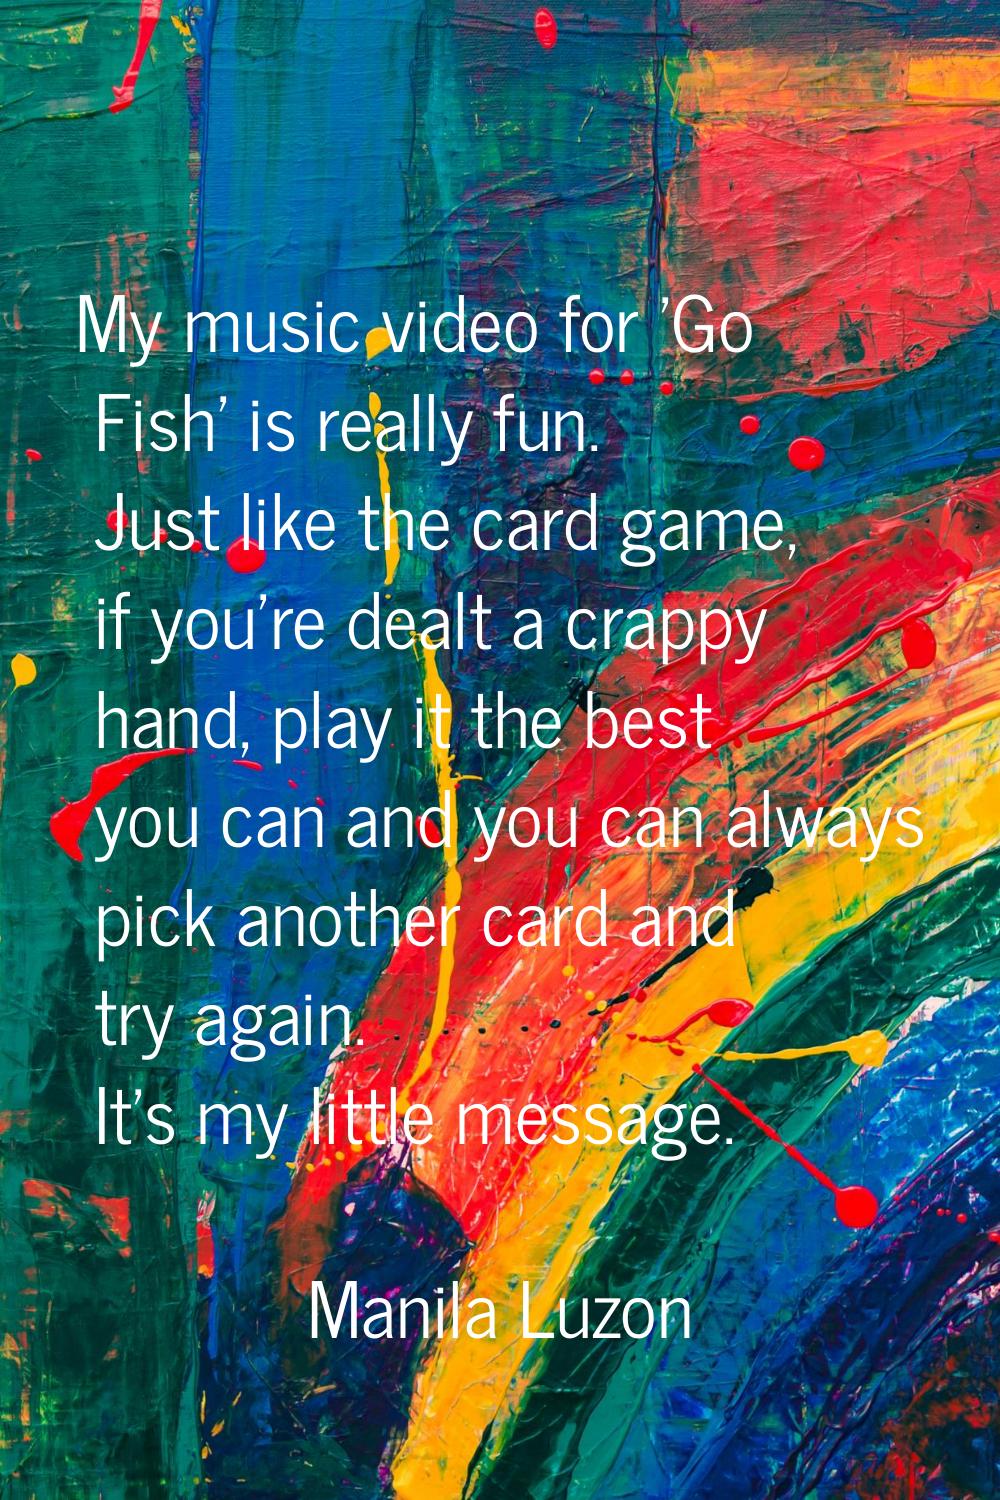 My music video for 'Go Fish' is really fun. Just like the card game, if you're dealt a crappy hand,